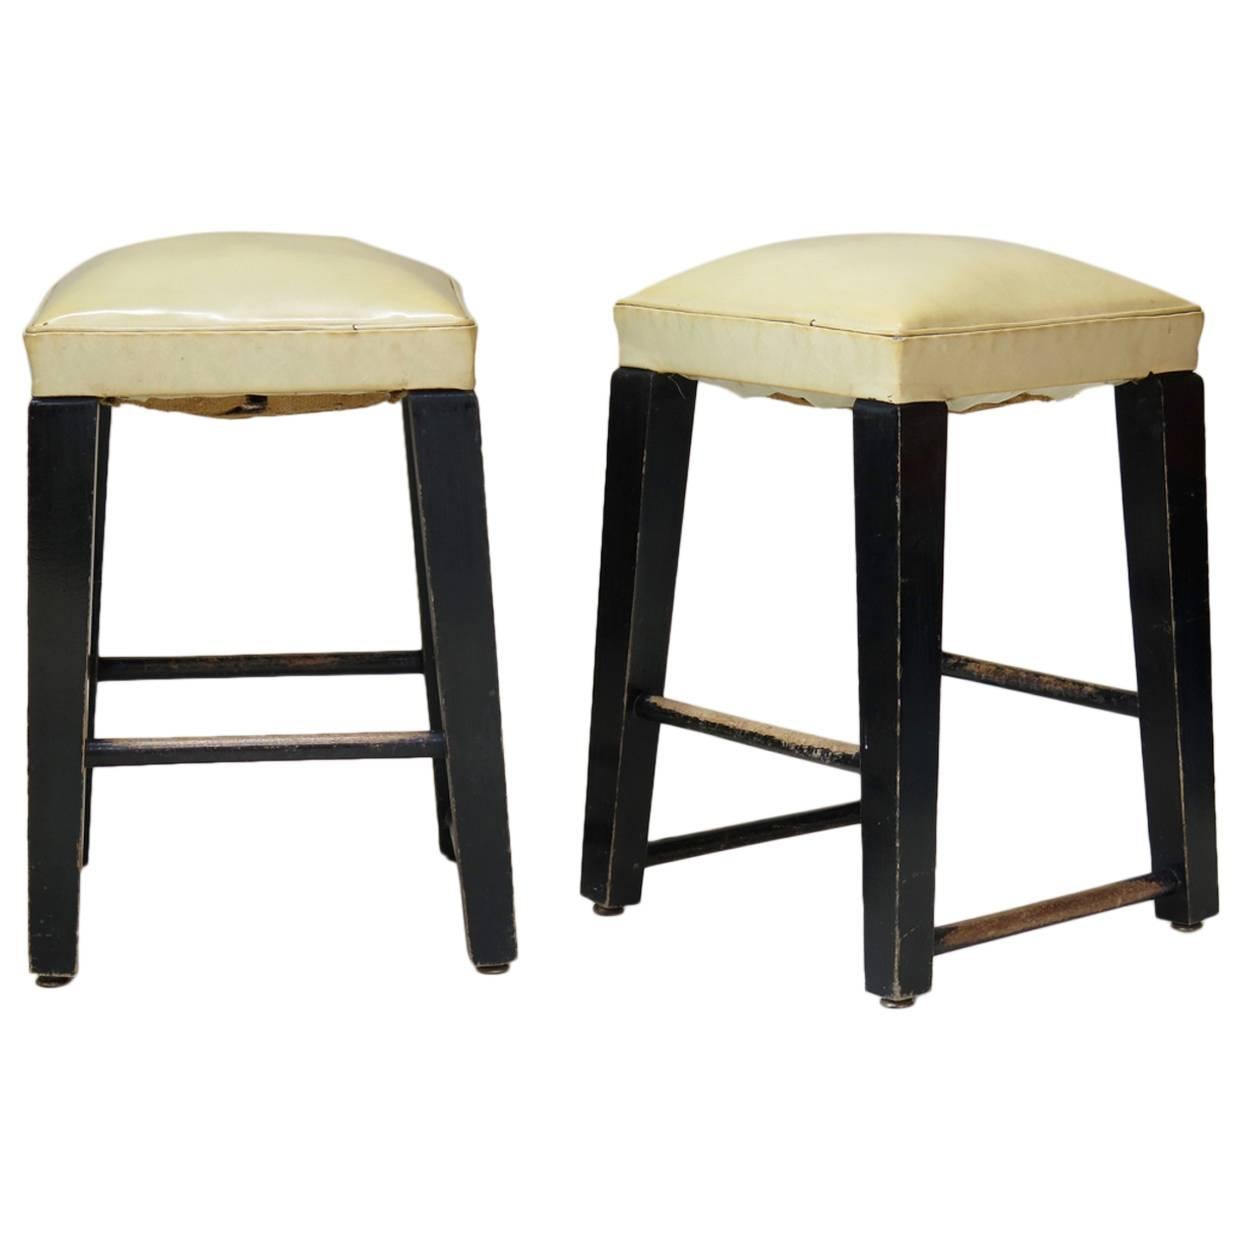 Pair of Wood and Faux-Leather Stools, France, circa 1950s For Sale